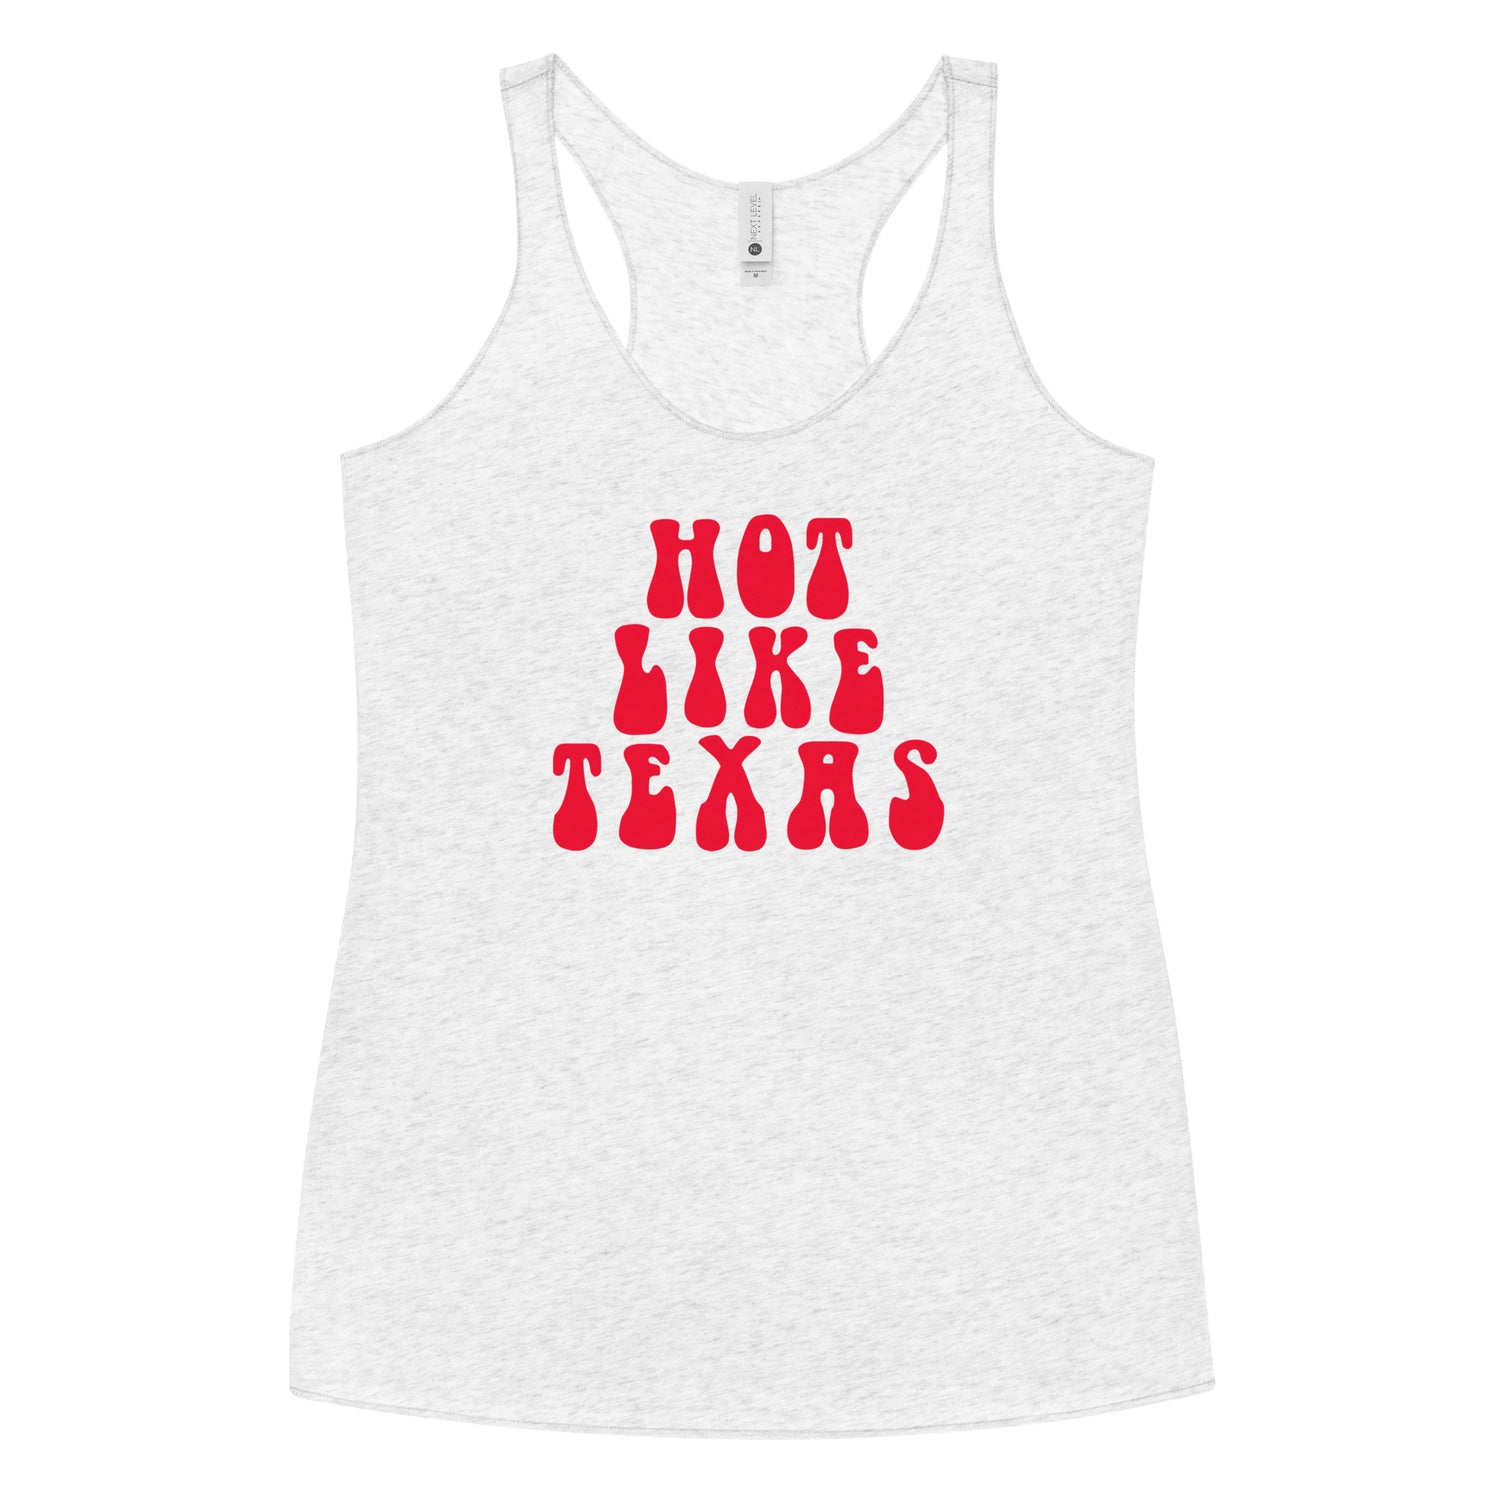 Collections – Texas Humor